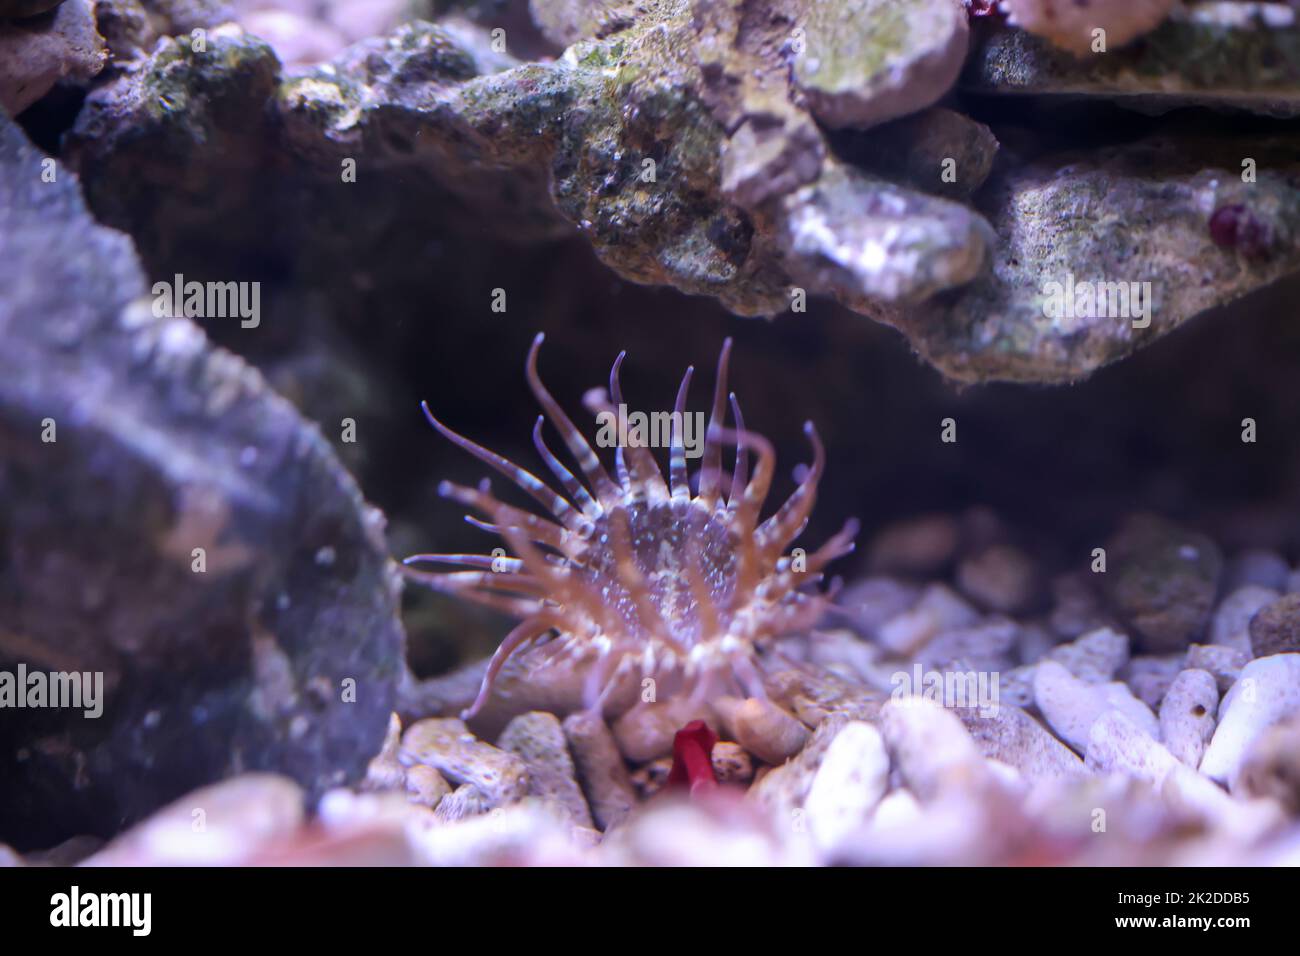 A glass rose in a marine aquarium. Glass roses are anemones and therefore animals. Stock Photo